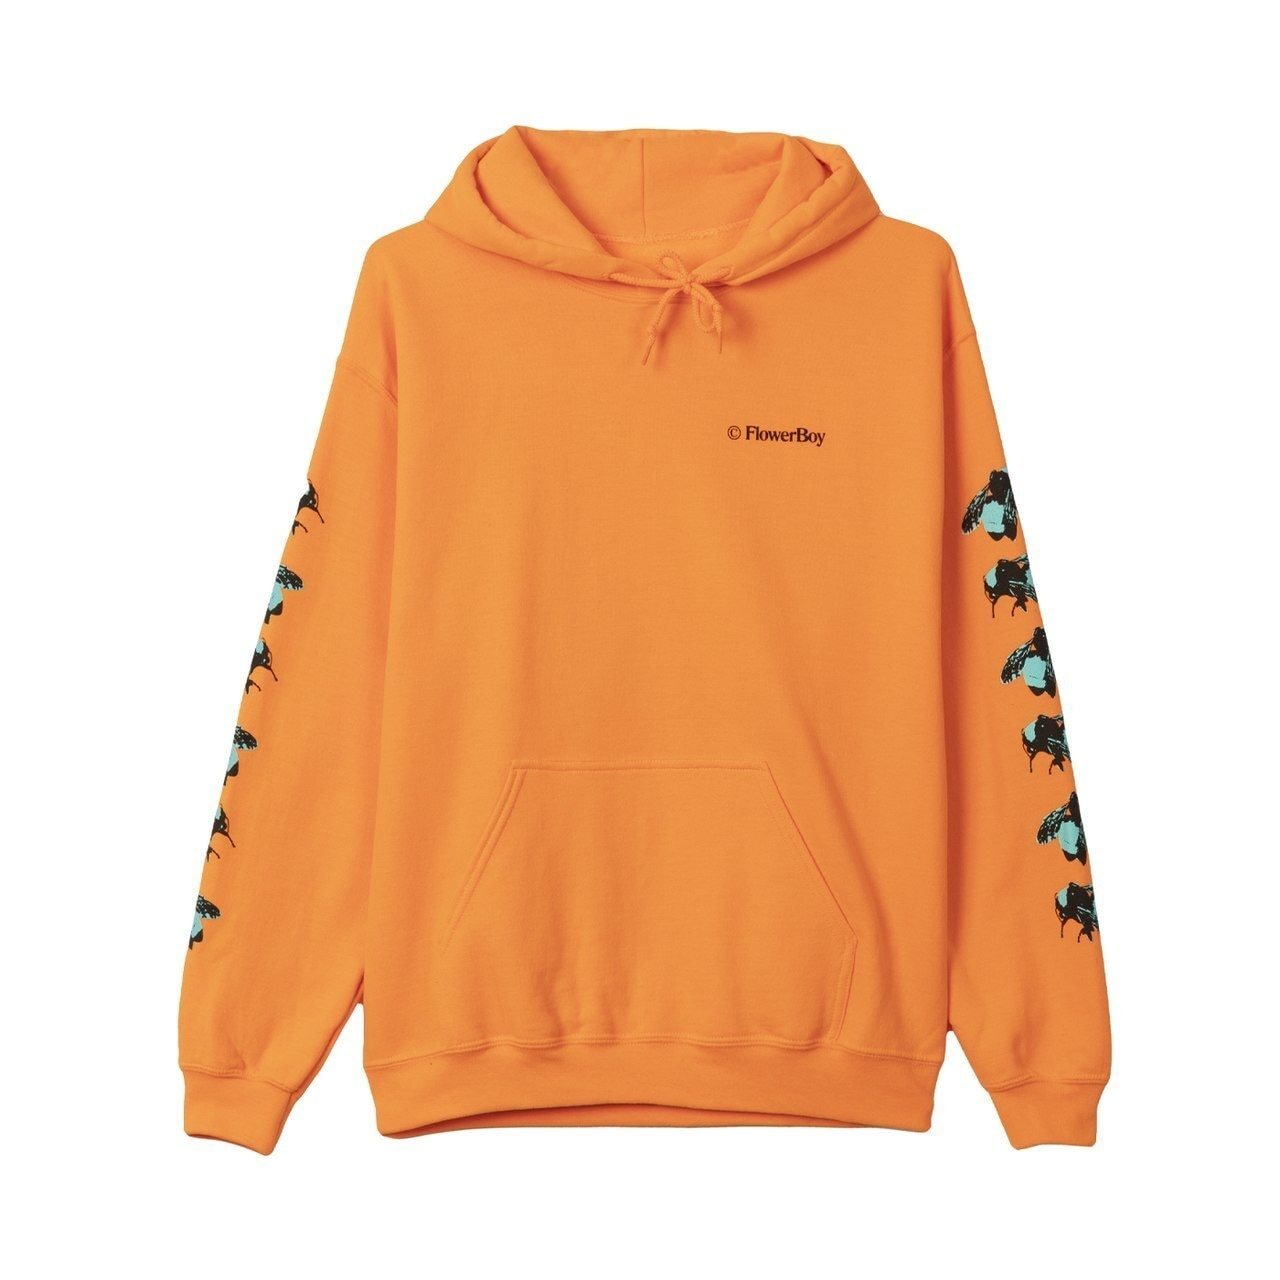 SAVE THE BEES HOODIE SAFETY ORANGE